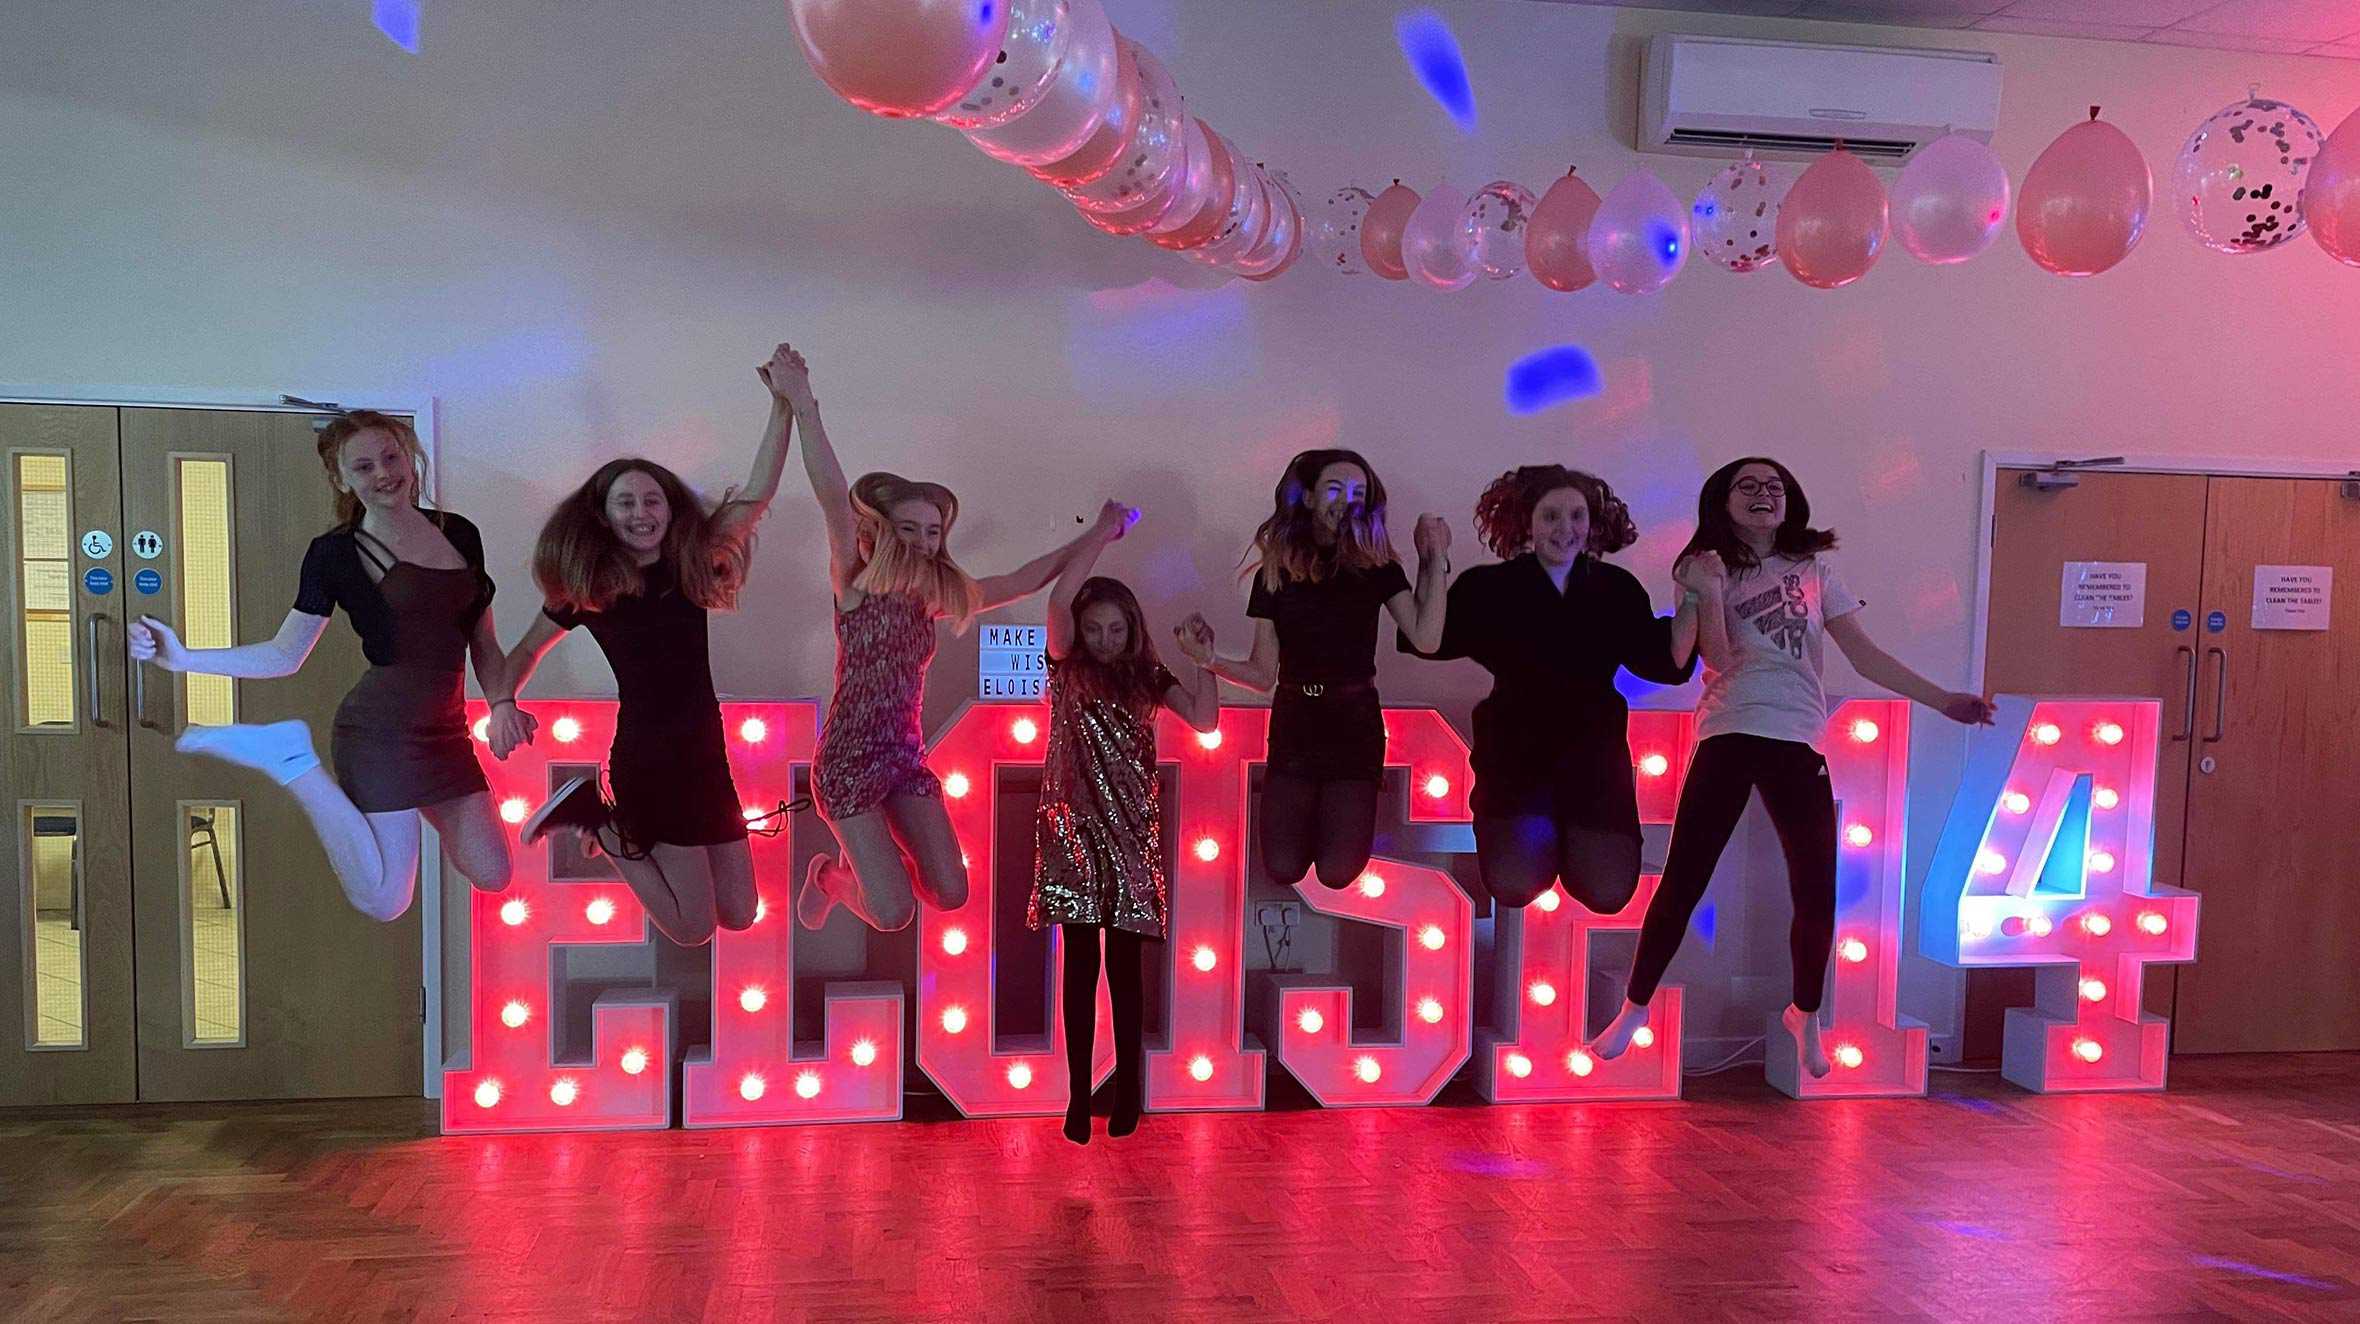 Eloise and her friends jumping in the air in front of her name, spelled out in large pink light up letters.